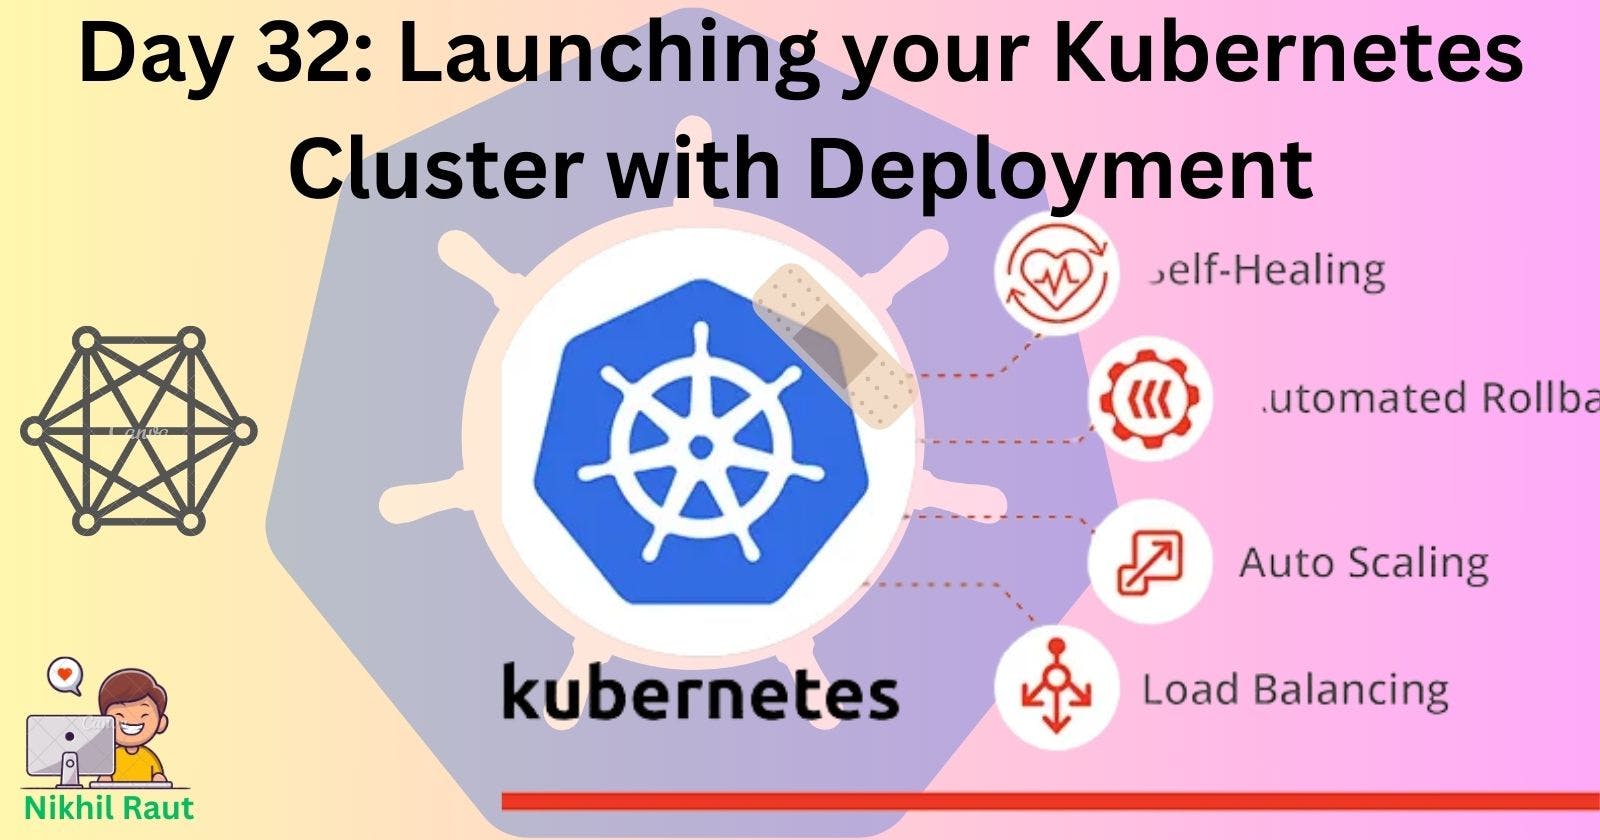 Getting Started with Your Kubernetes Cluster Deployment